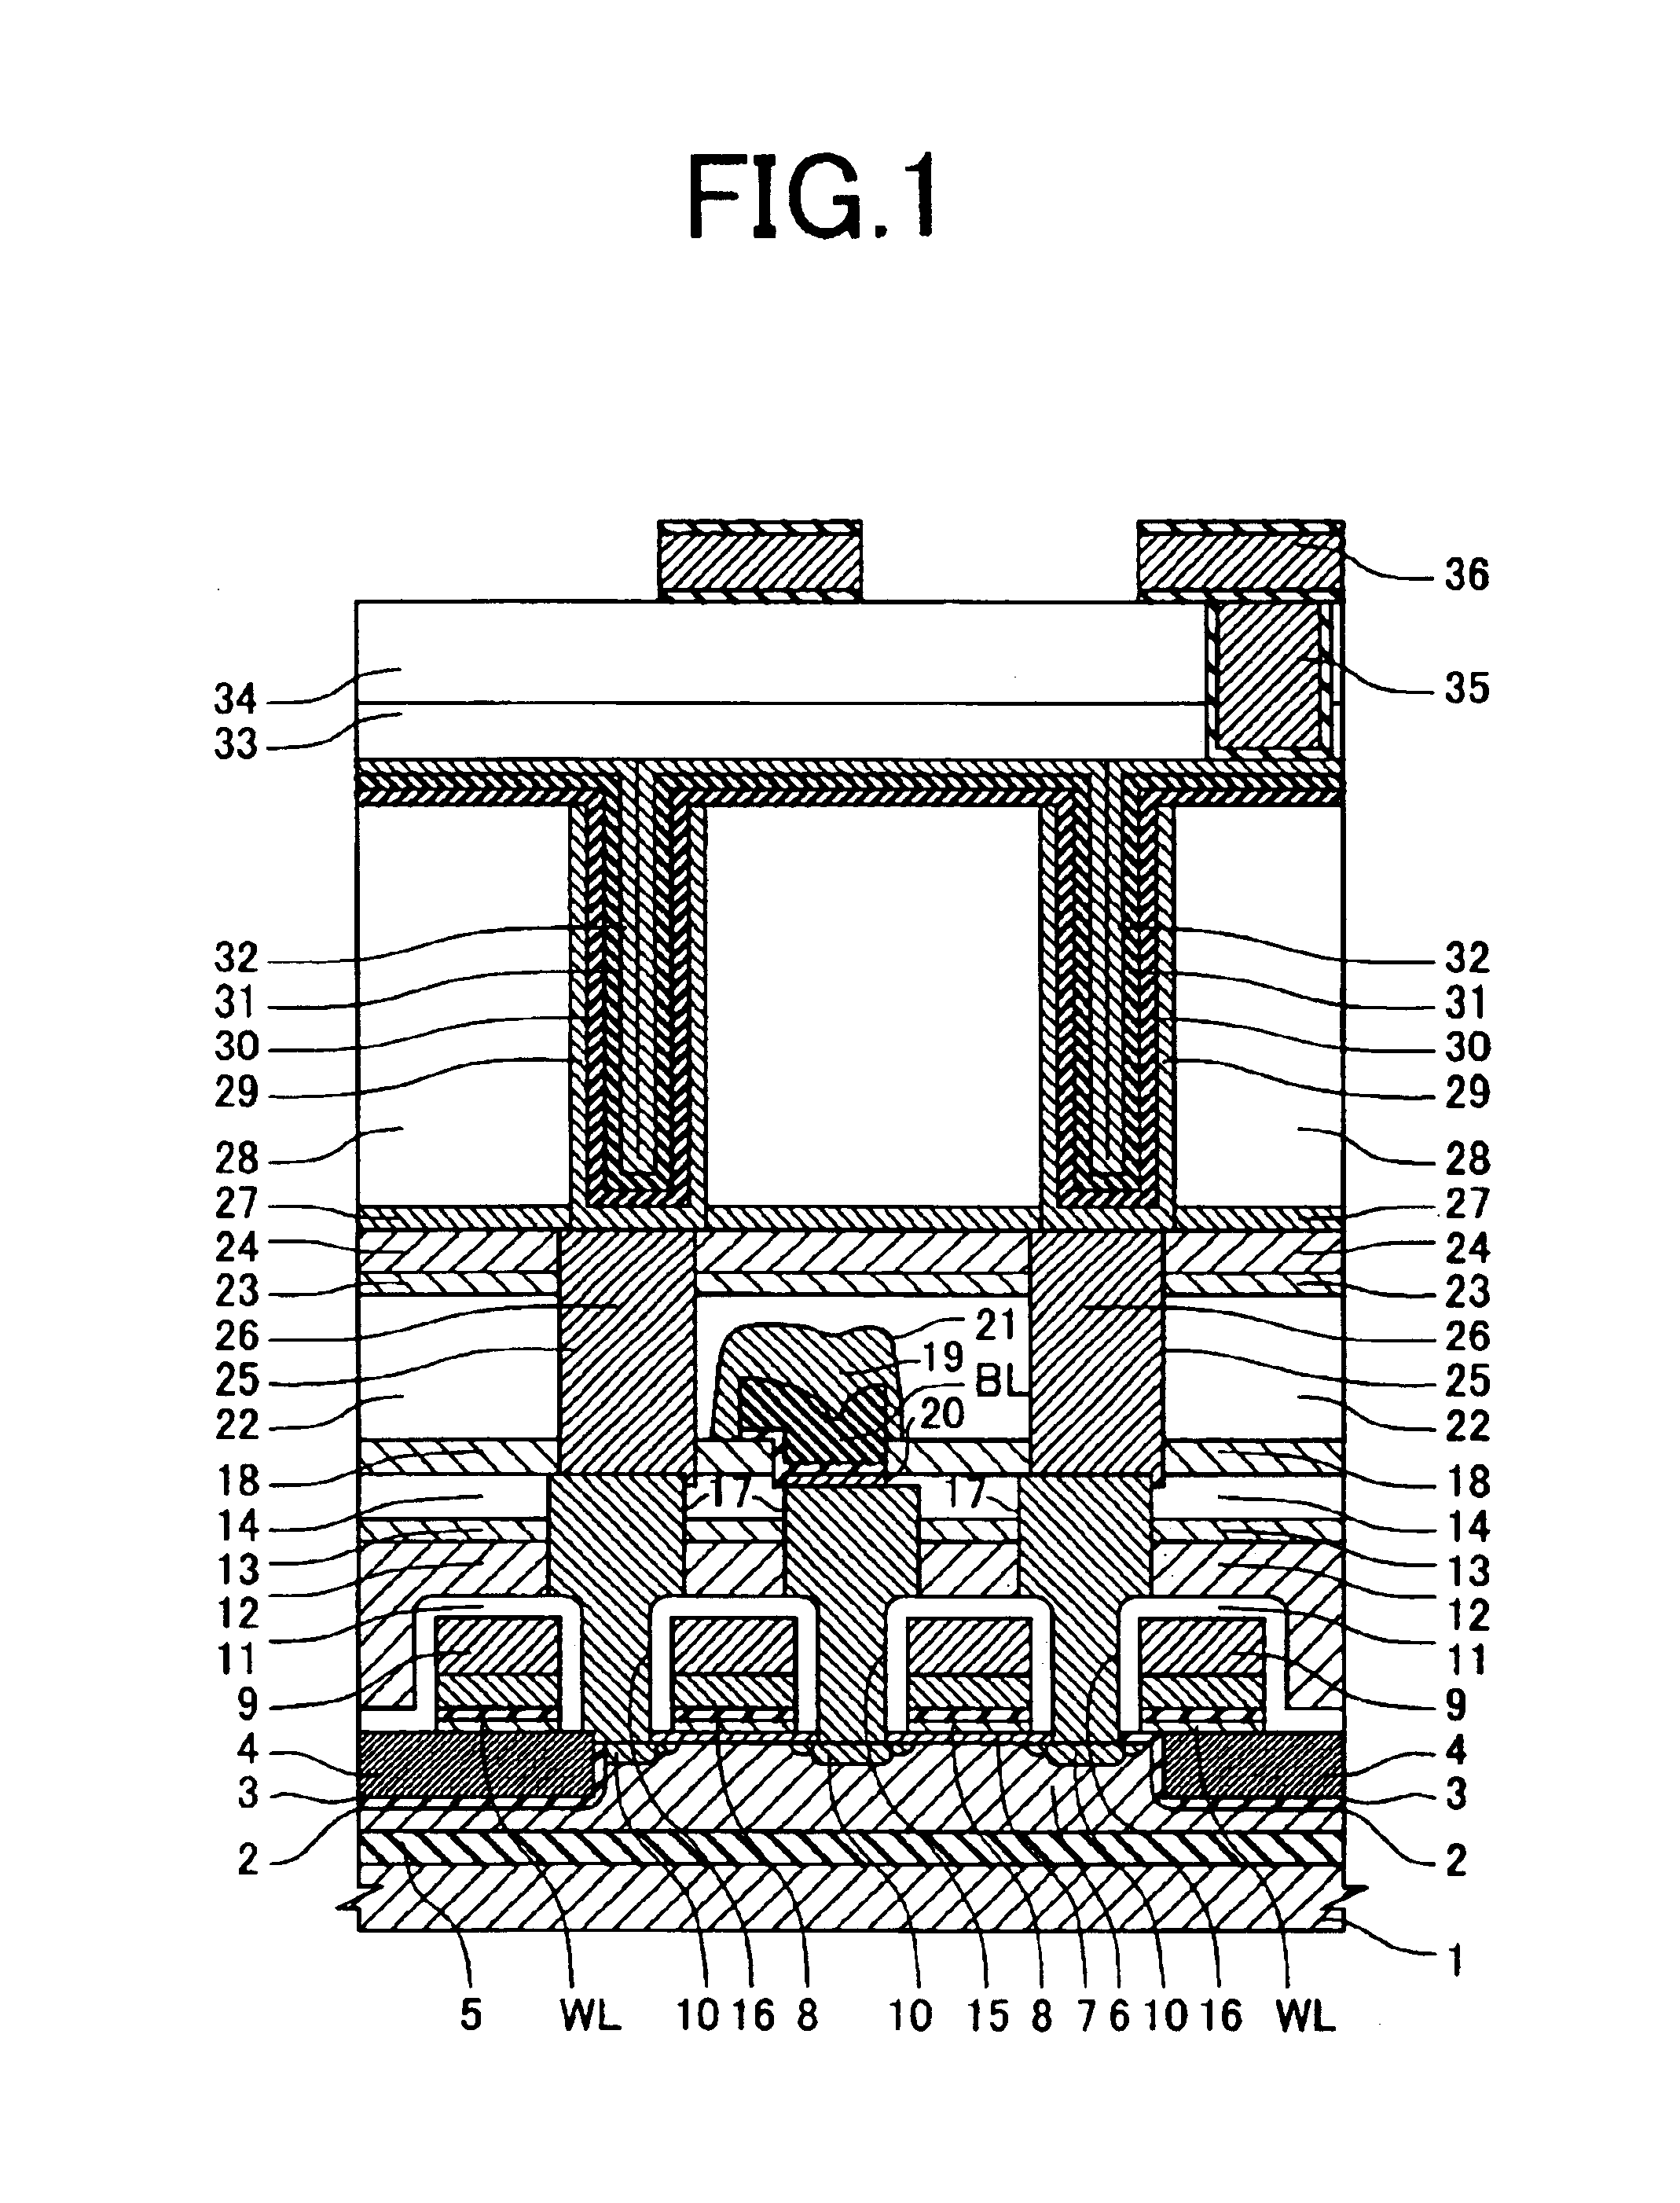 Method of making a memory structure having a multilayered contact and a storage capacitor with a composite dielectric layer of crystalized niobium pentoxide and tantalum pentoxide films